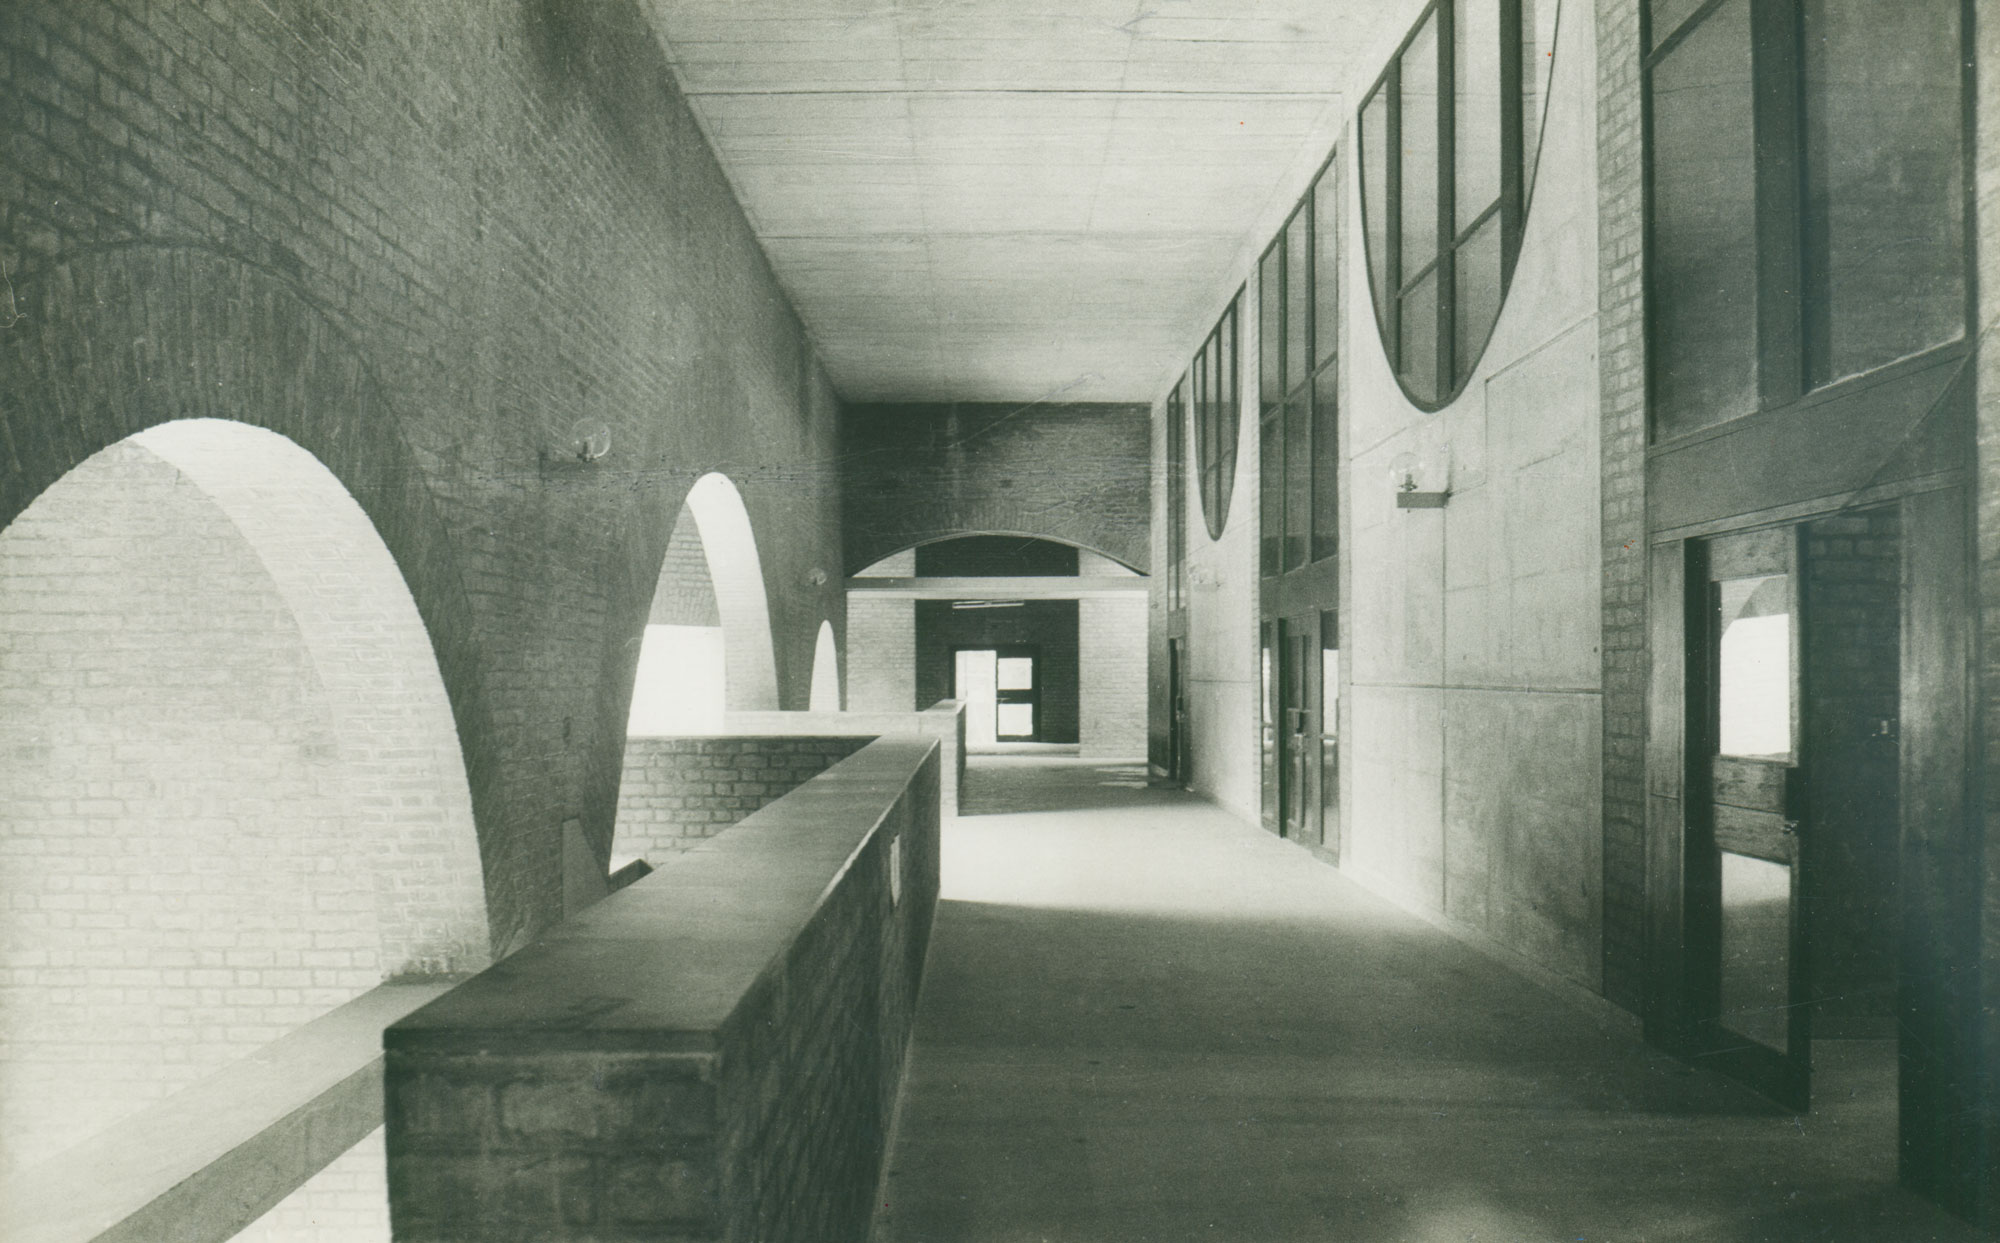 Balck and white photograph of hallway in academic building